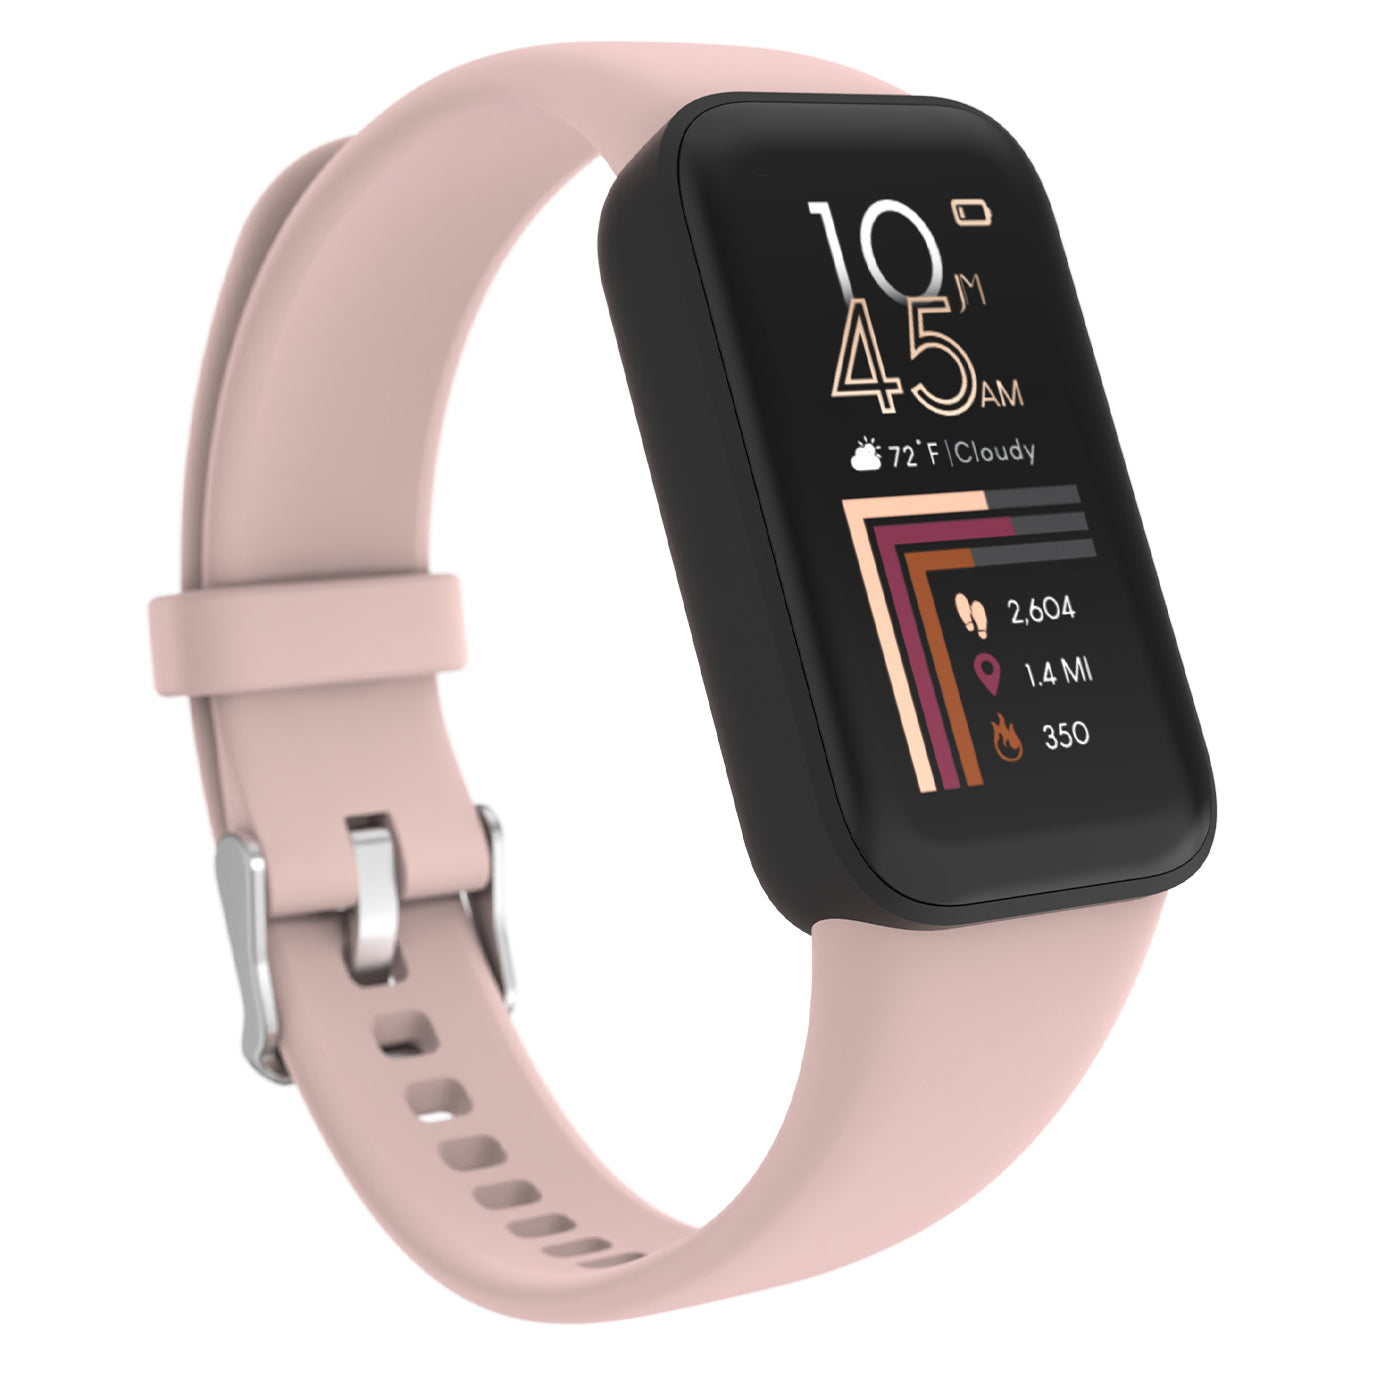 iTouch Active | Jillian Michaels Edition Fitness Tracker in Blush